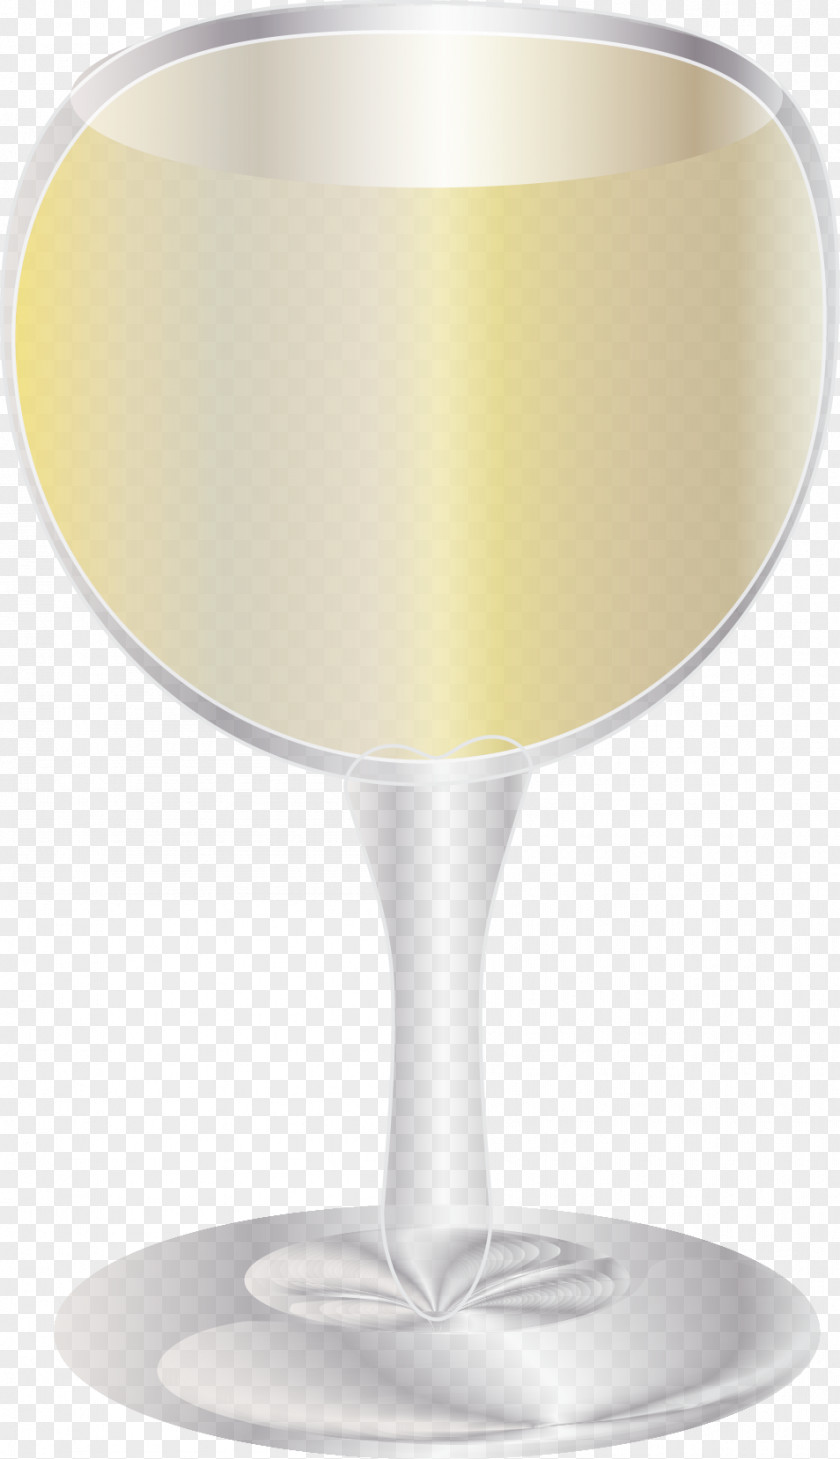 Celebrate Indulgence Wine Glass Champagne Cup Chalice PNG